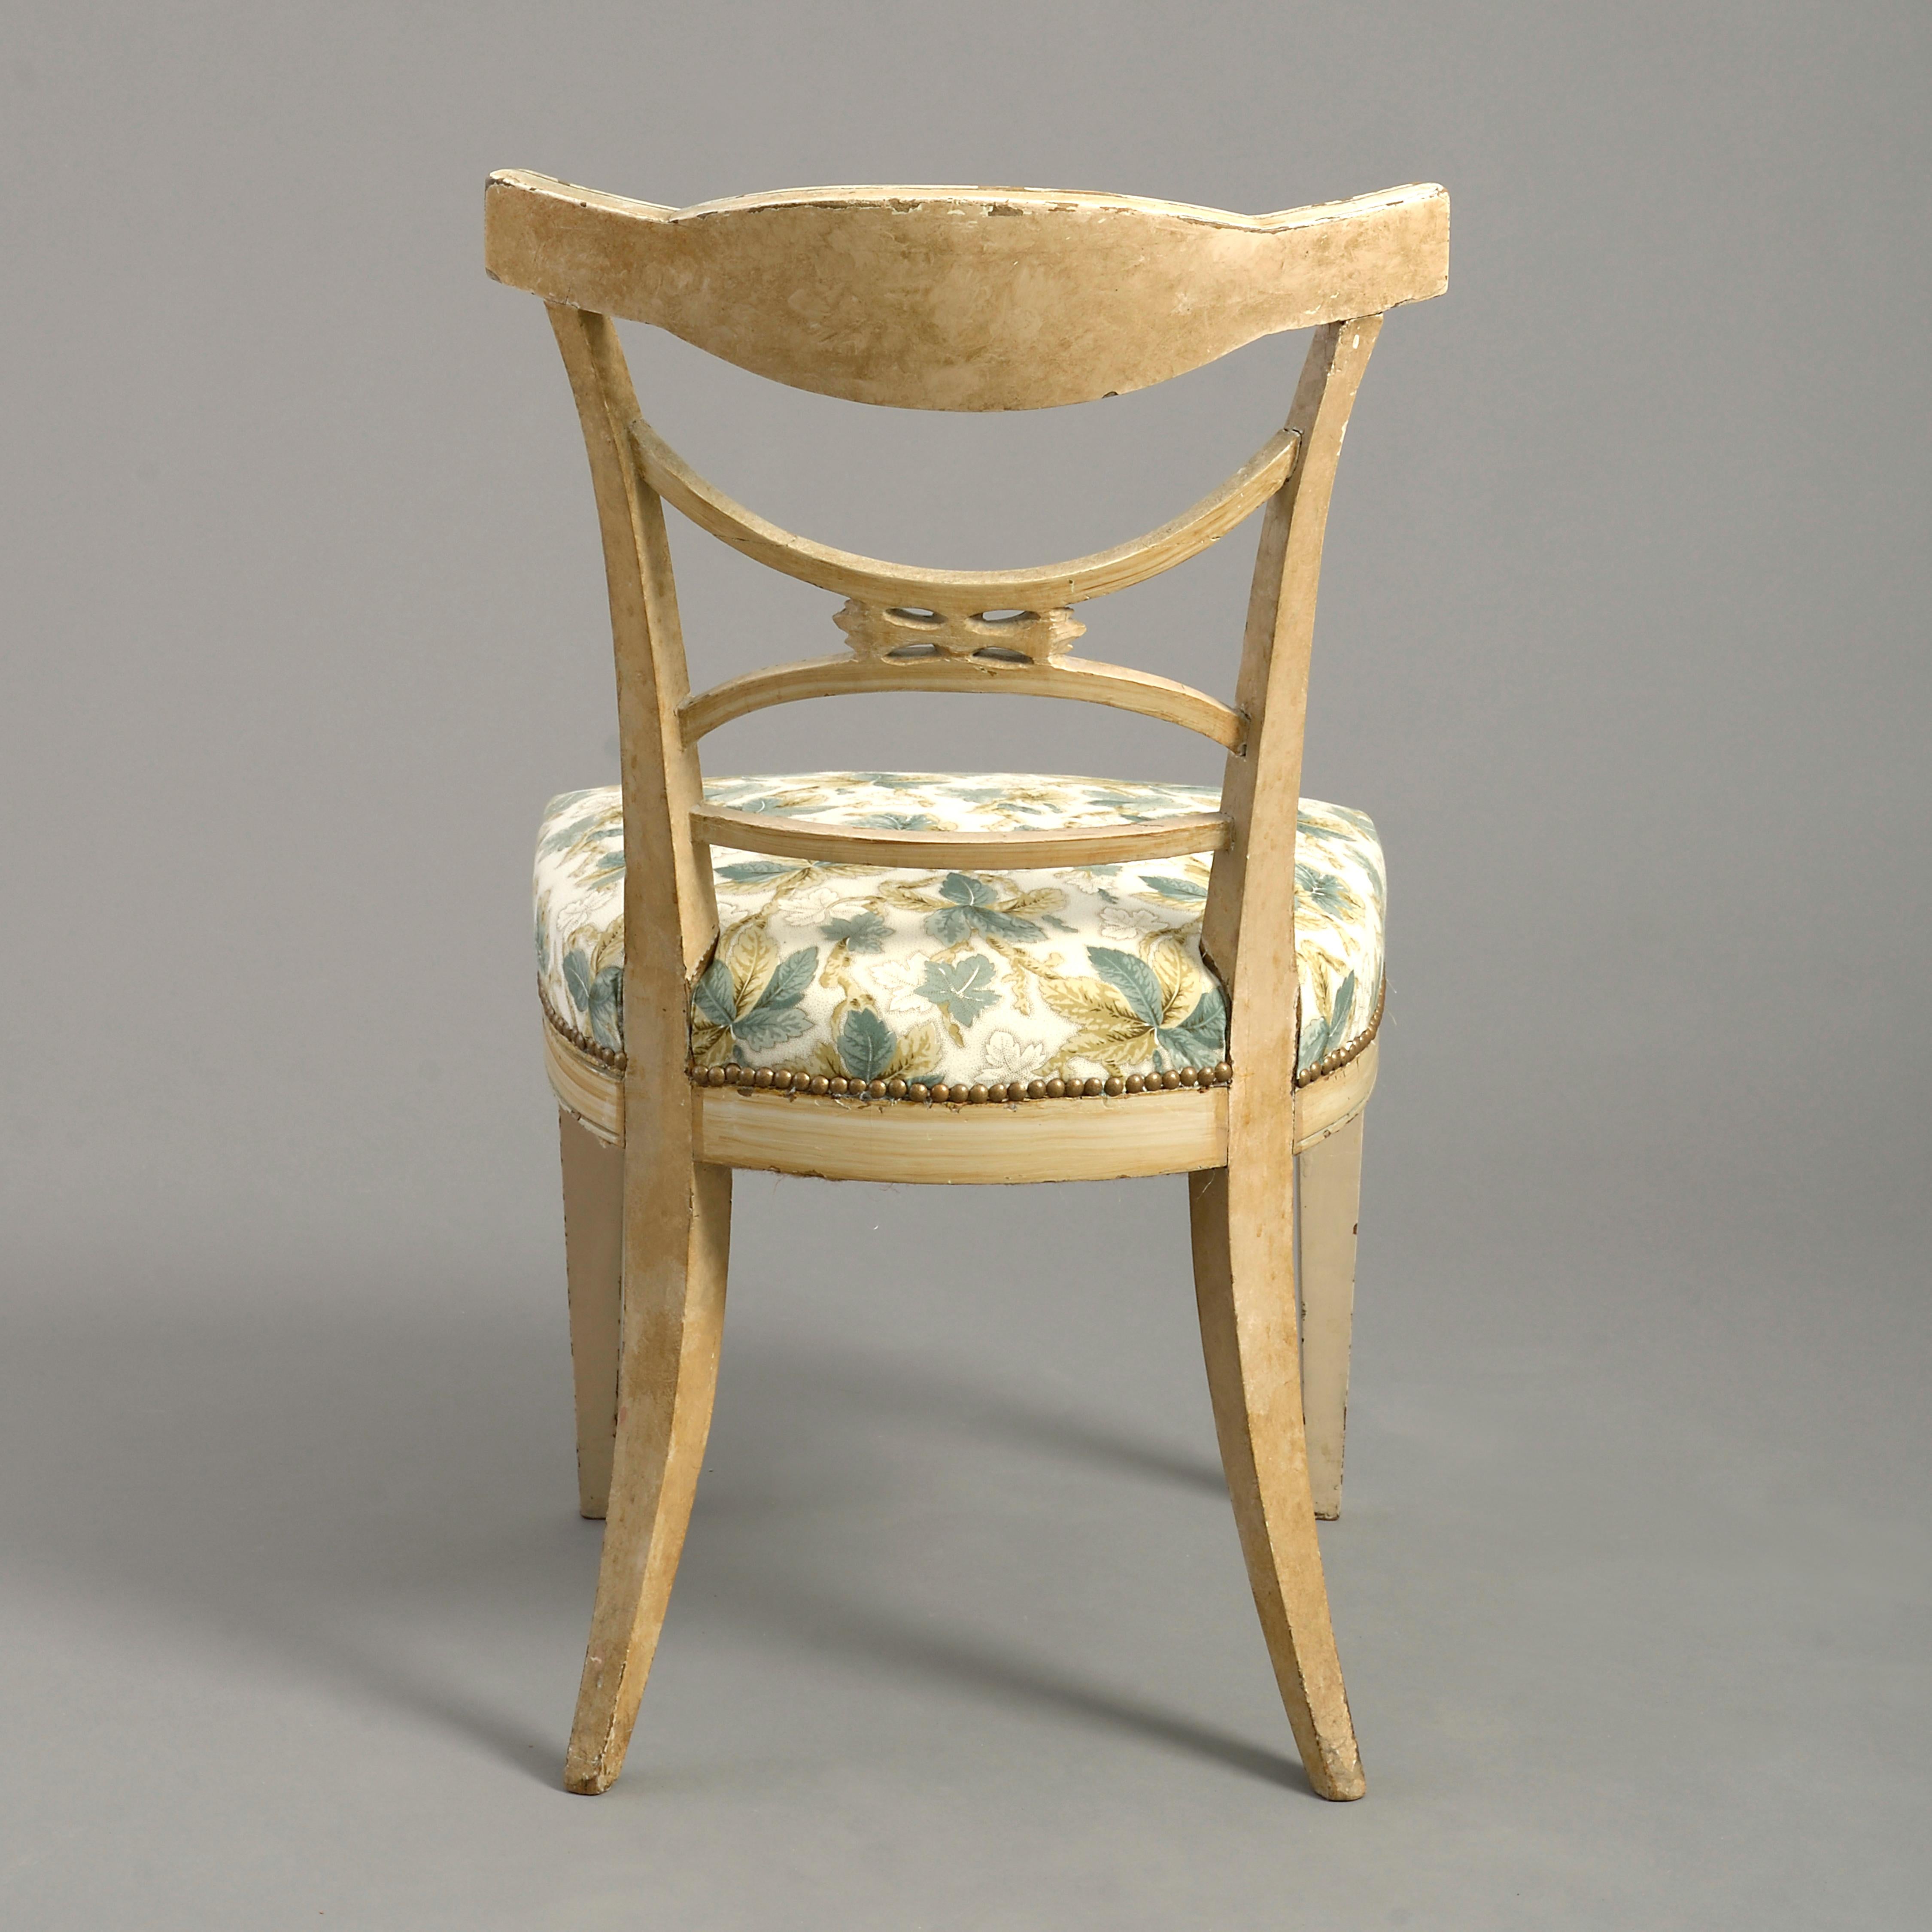 Hand-Carved Early 19th Century Painted Gustavian Side Chair